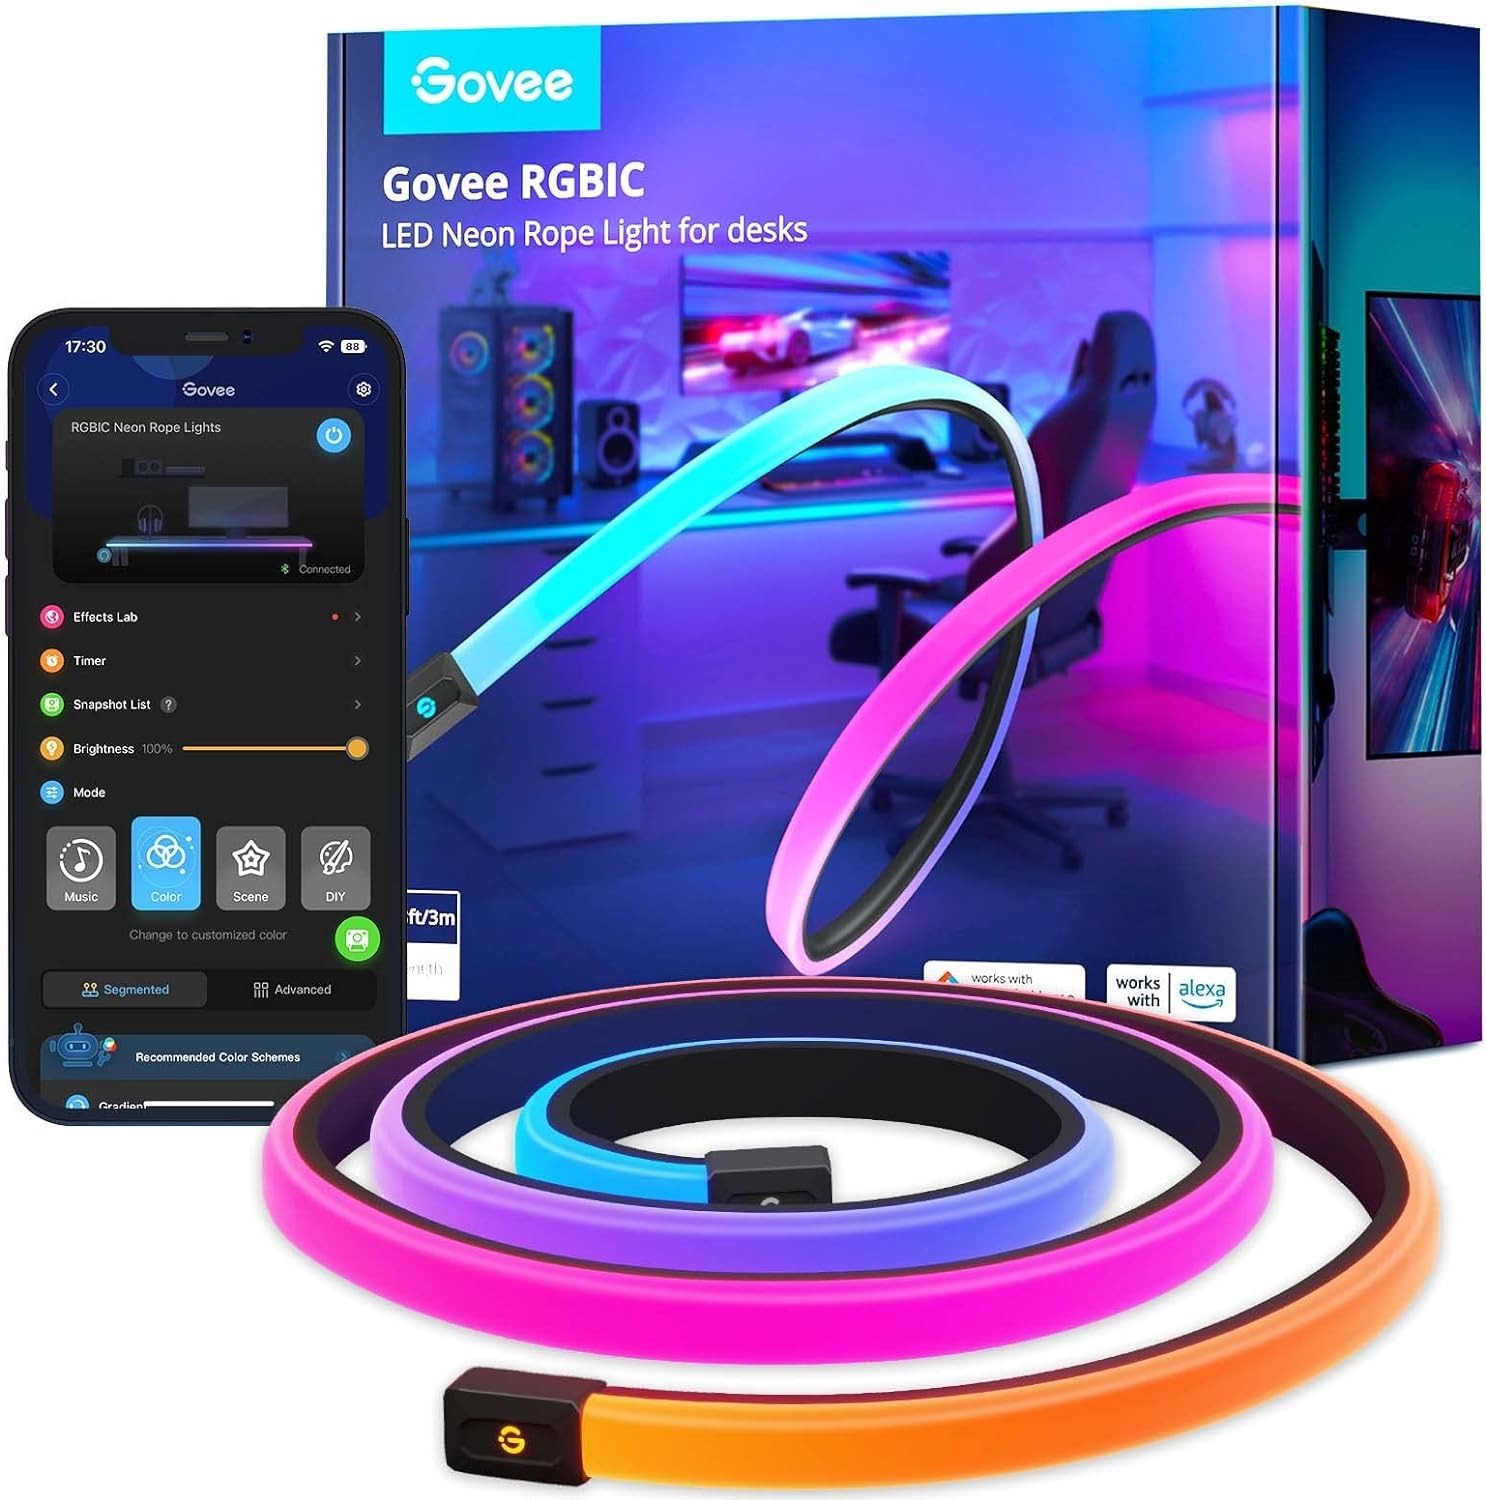 Govee 10' Neon Rope RGBIC Lights Cuttable Strip $50 + Free Shipping